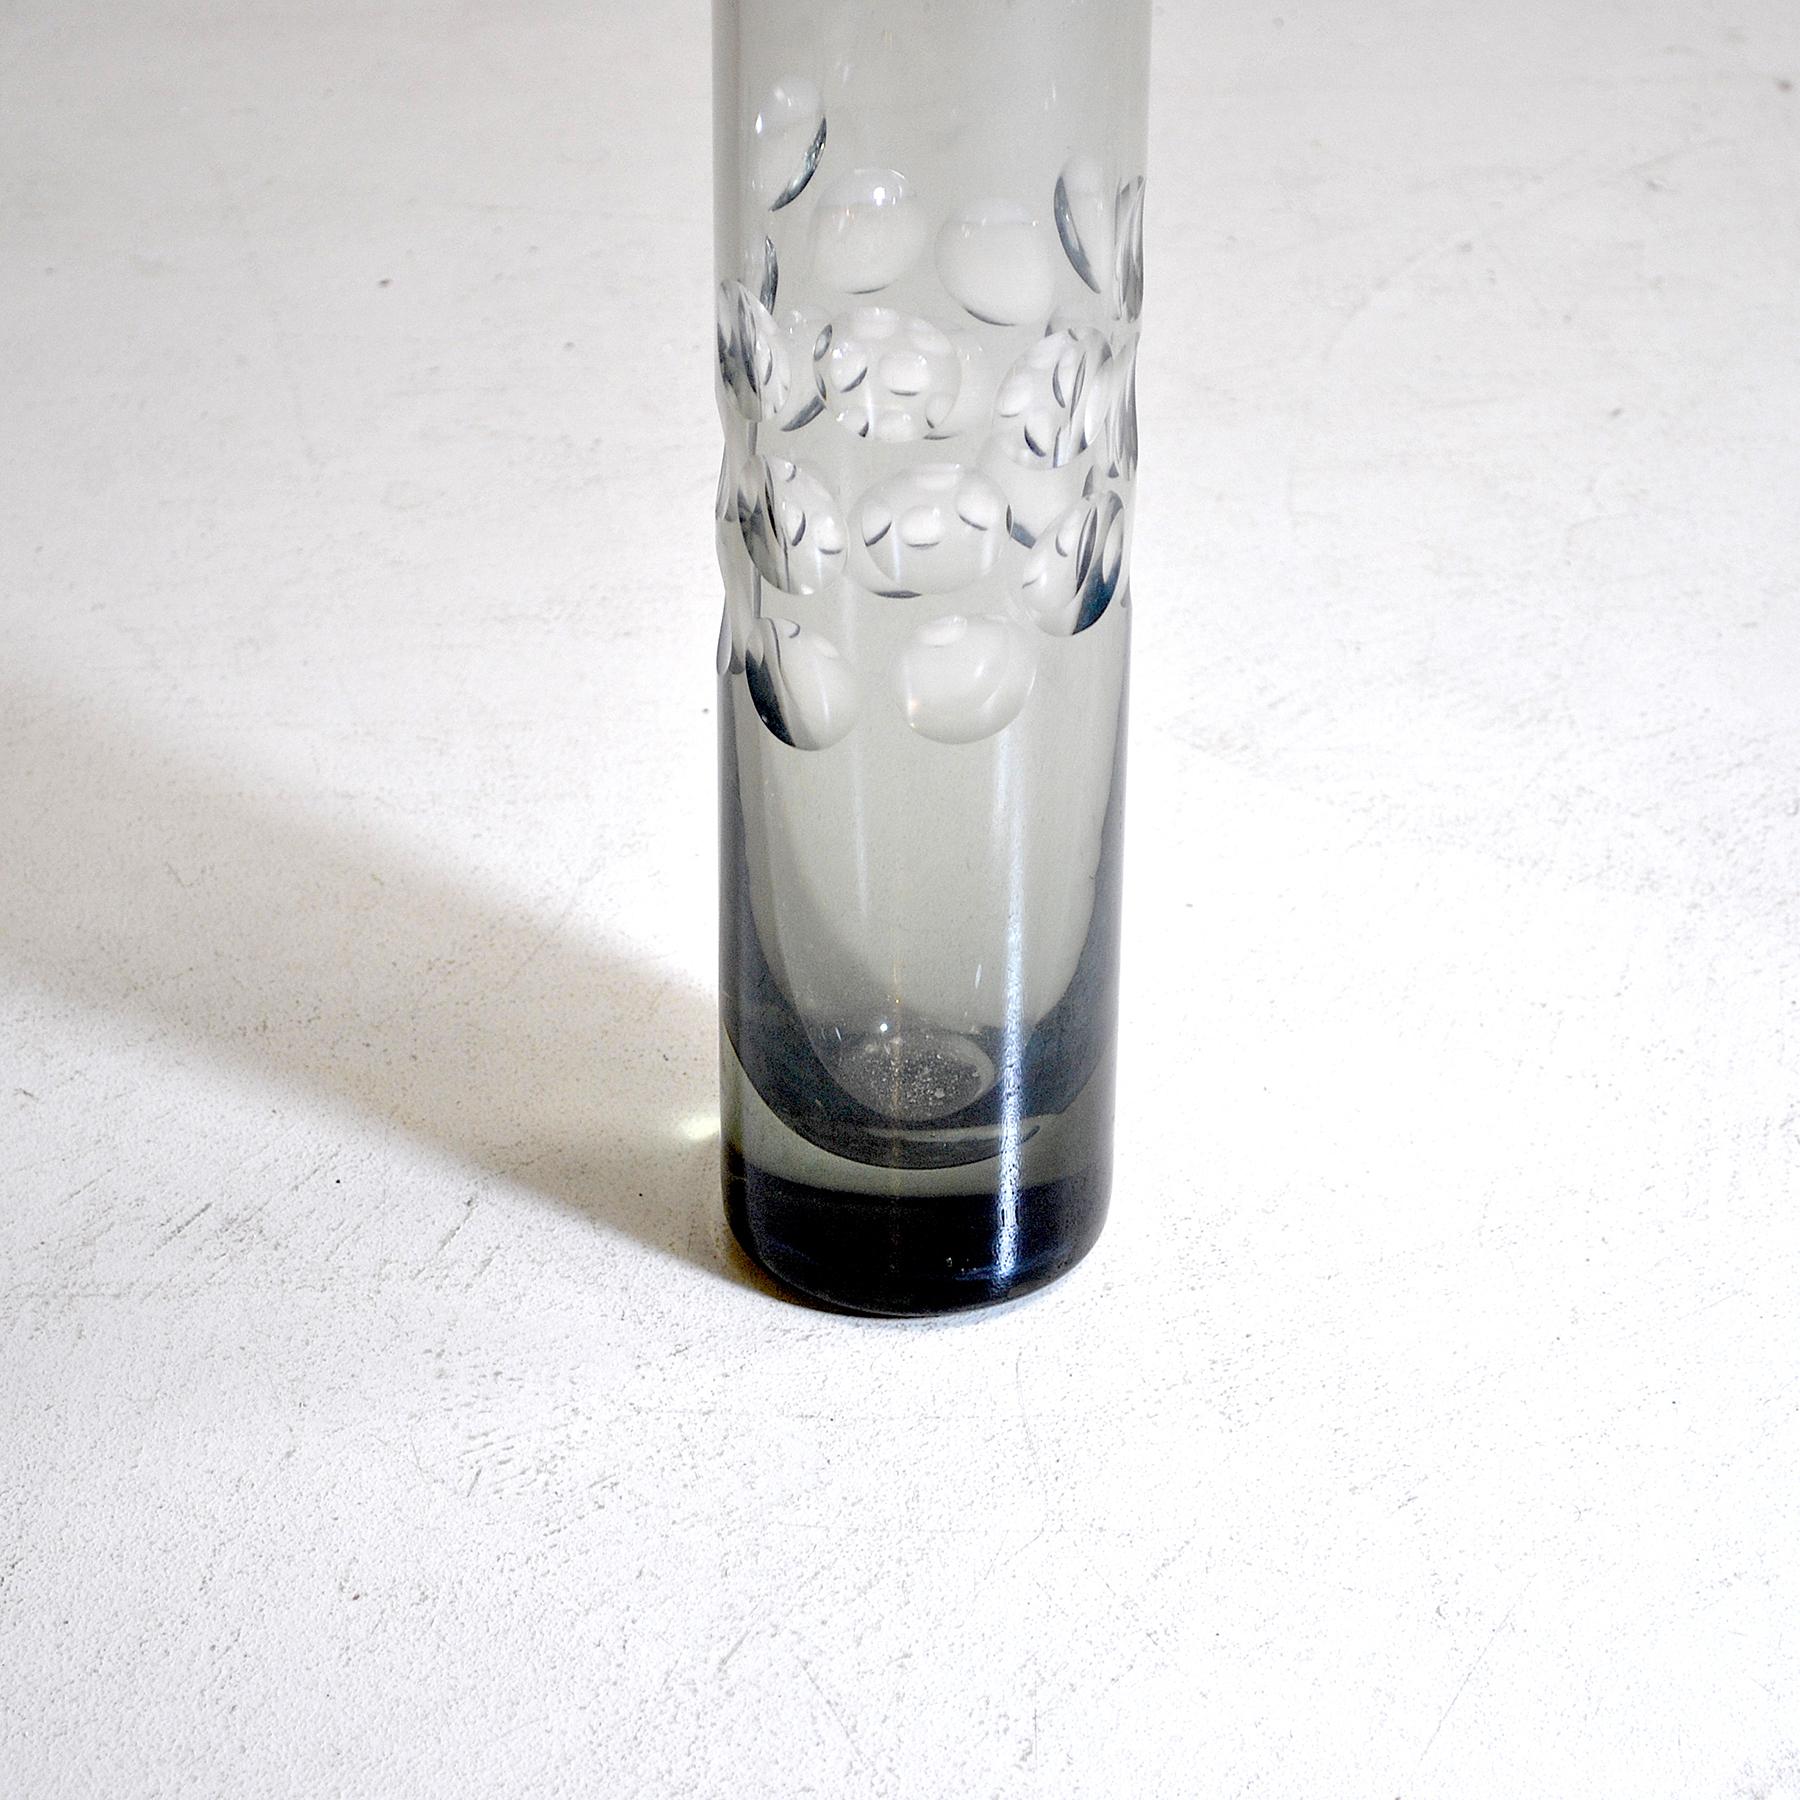 Italian Cylinder Vase in Heavy Smoked Glass from the 1960s For Sale